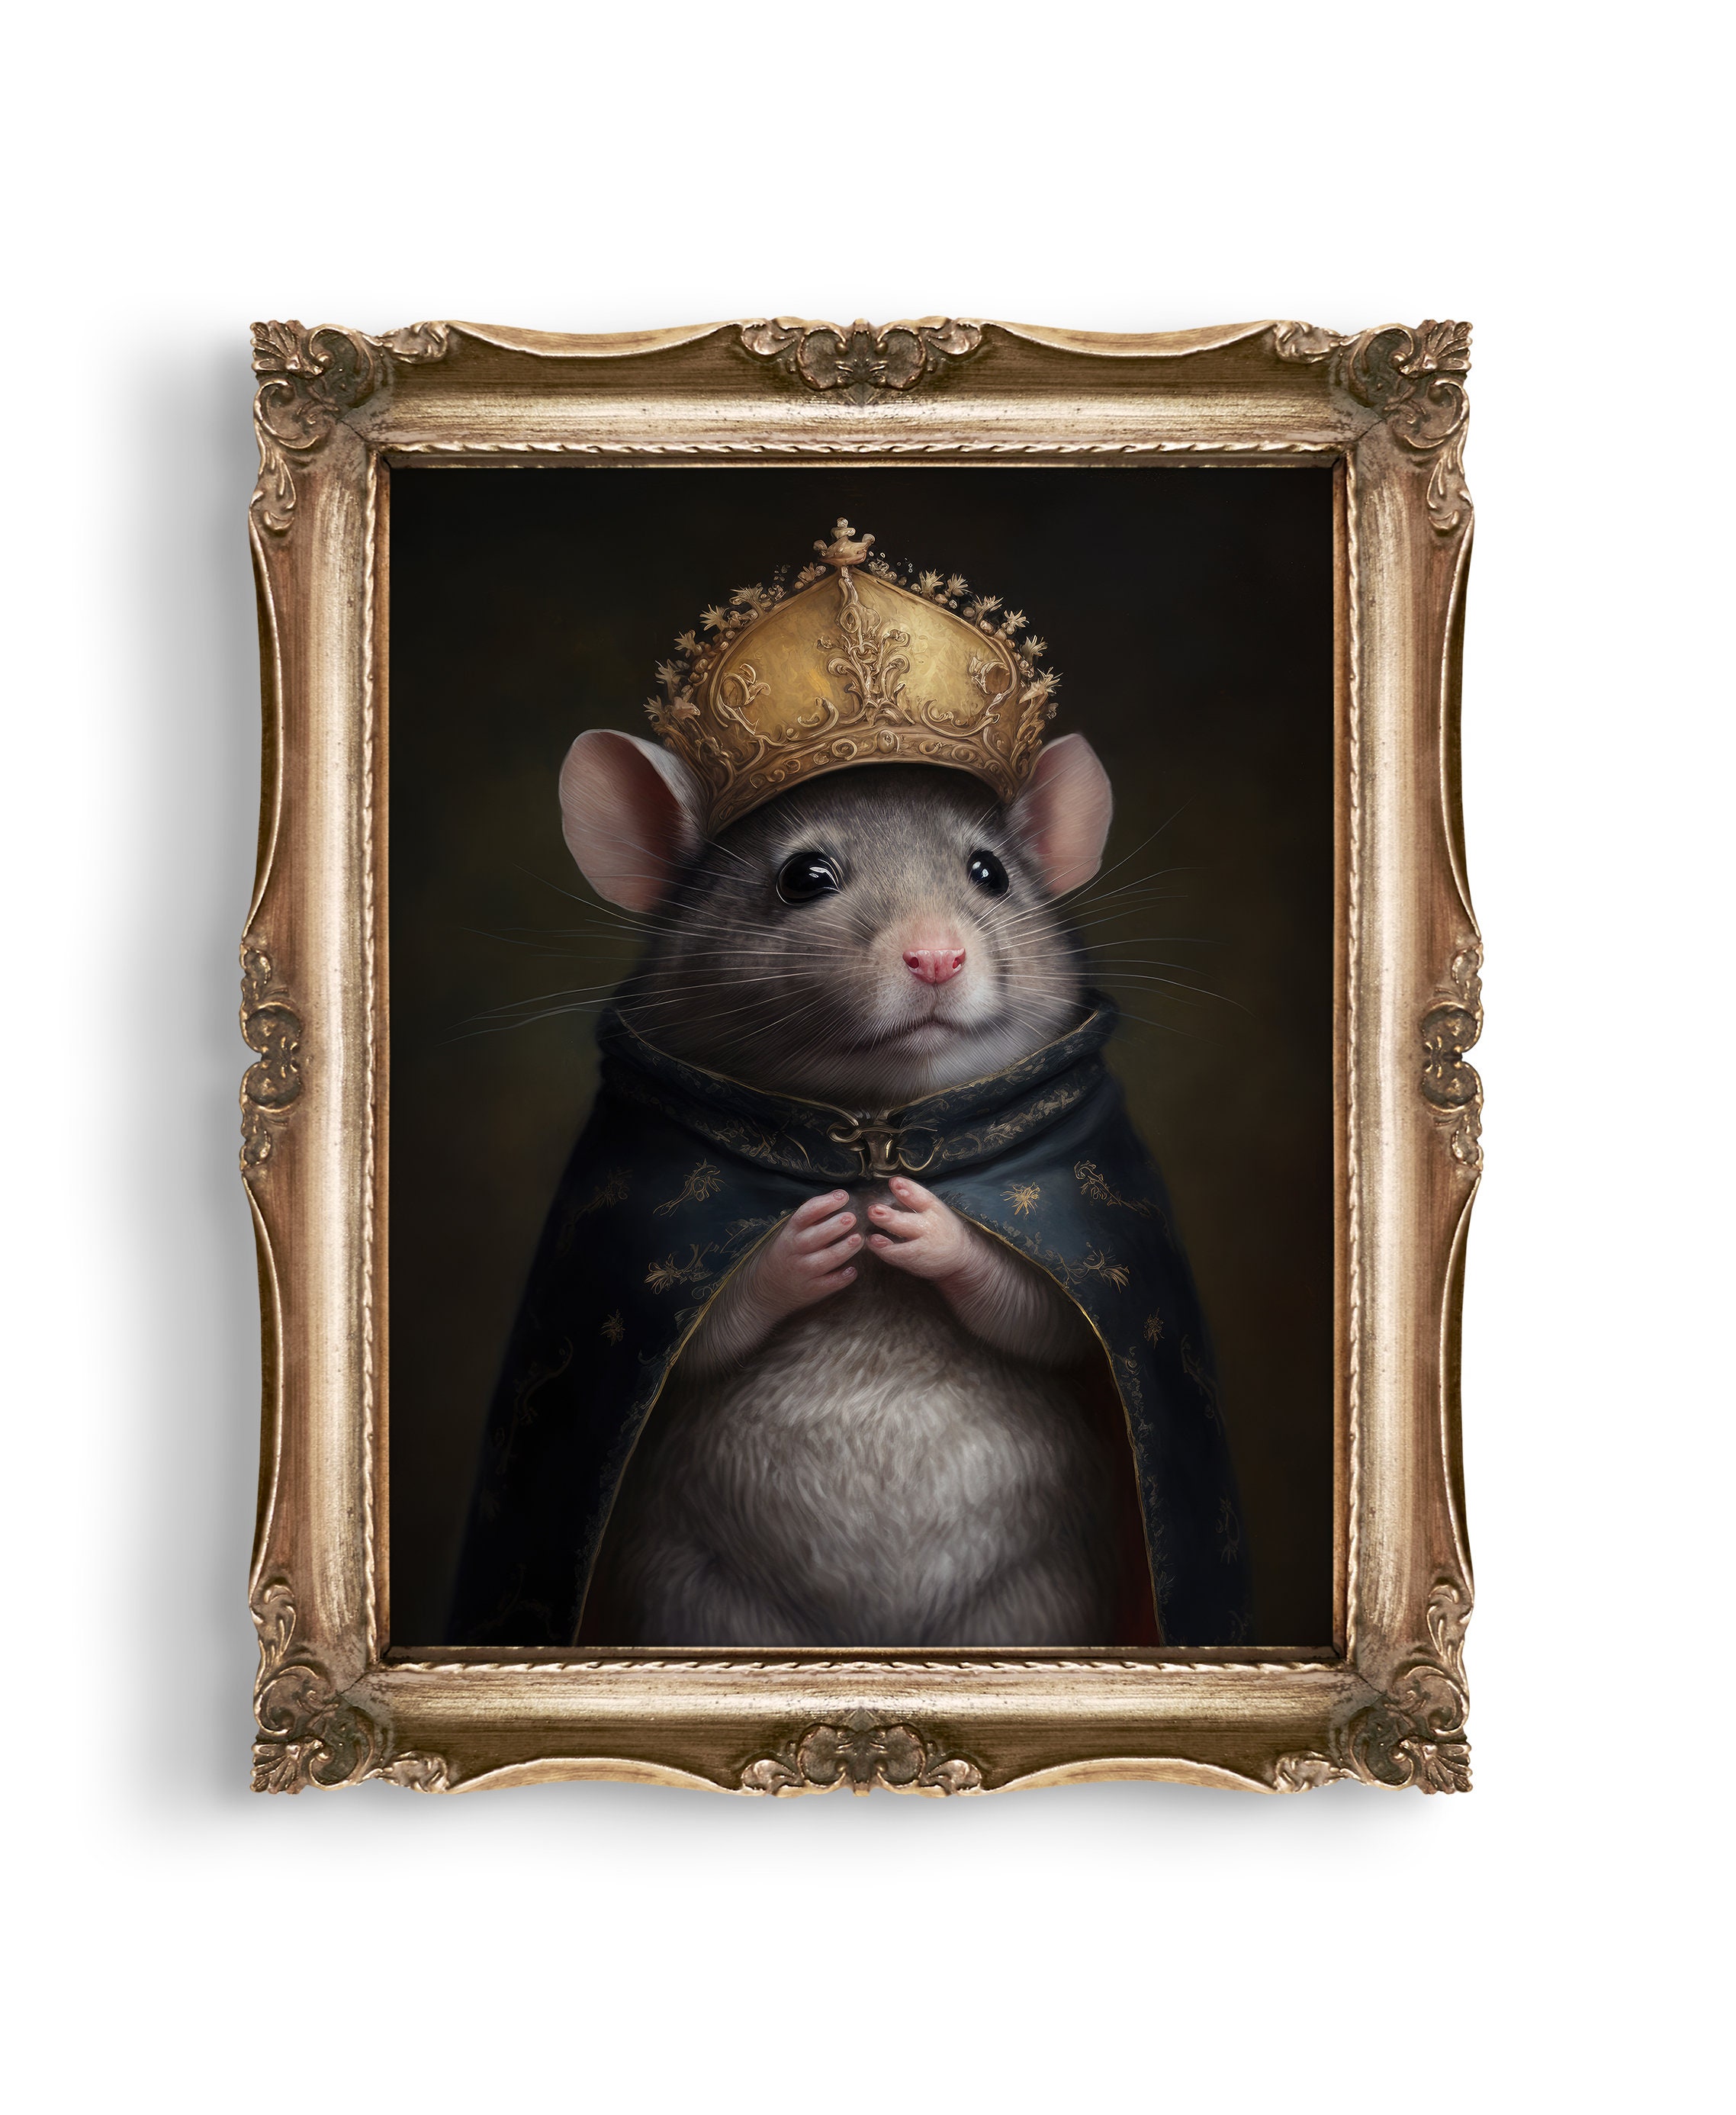 Canvas Painting, Vintage Rat King Poster, Cute Mouse Art Poster, Ideal Gift  For Living Room, Kitchen, Decor Wall Art Wall Decor, Home Decor, Wall Art,  Room Decor, Room Decoration, No Frame 